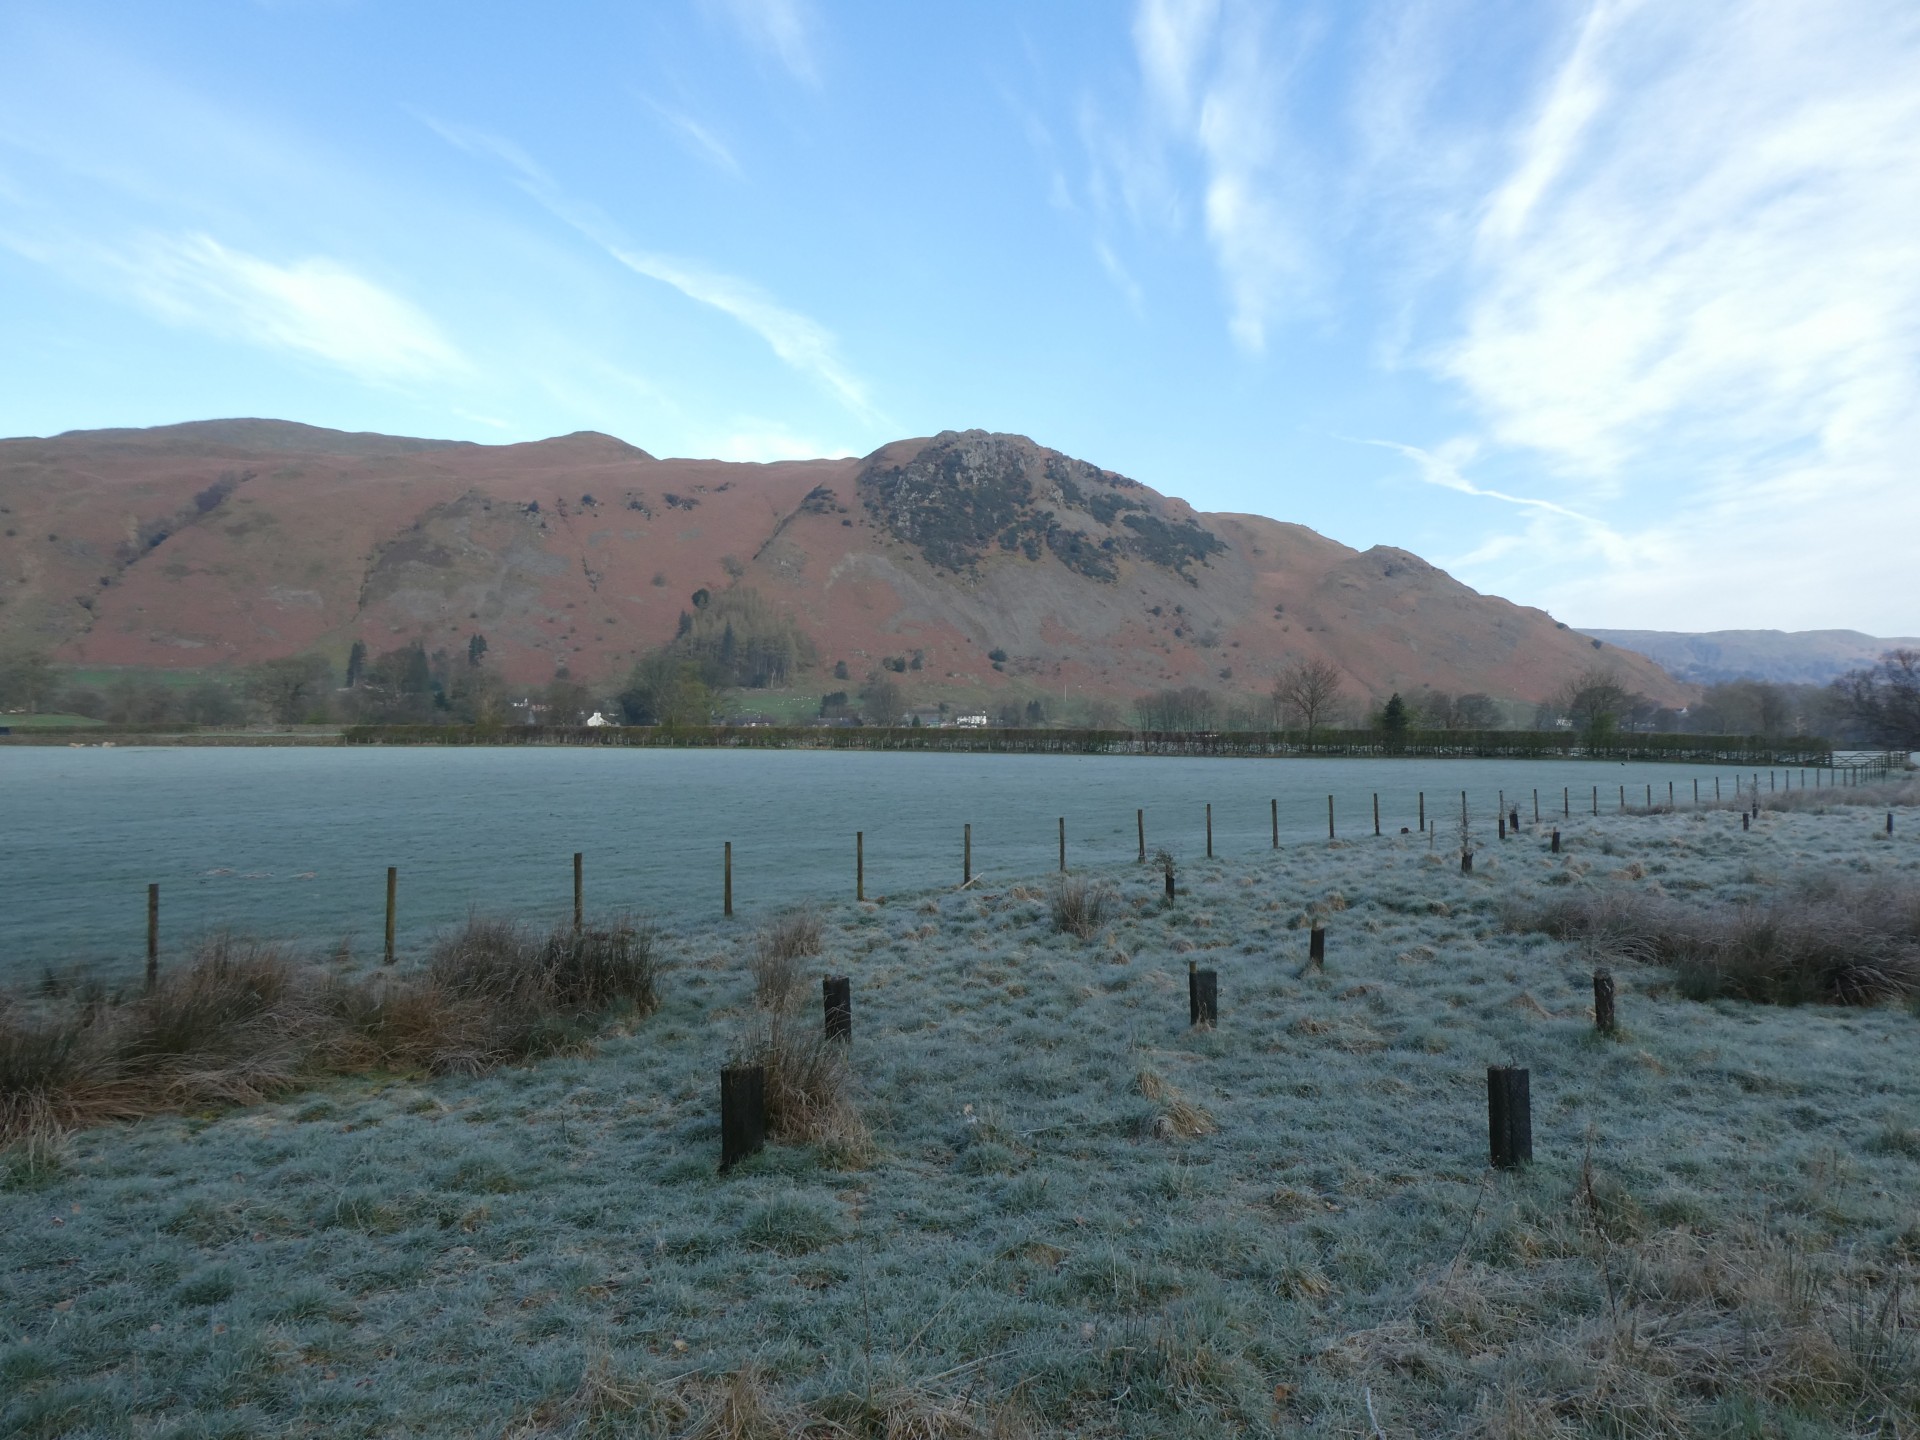 Frosty view of Arnison Crag